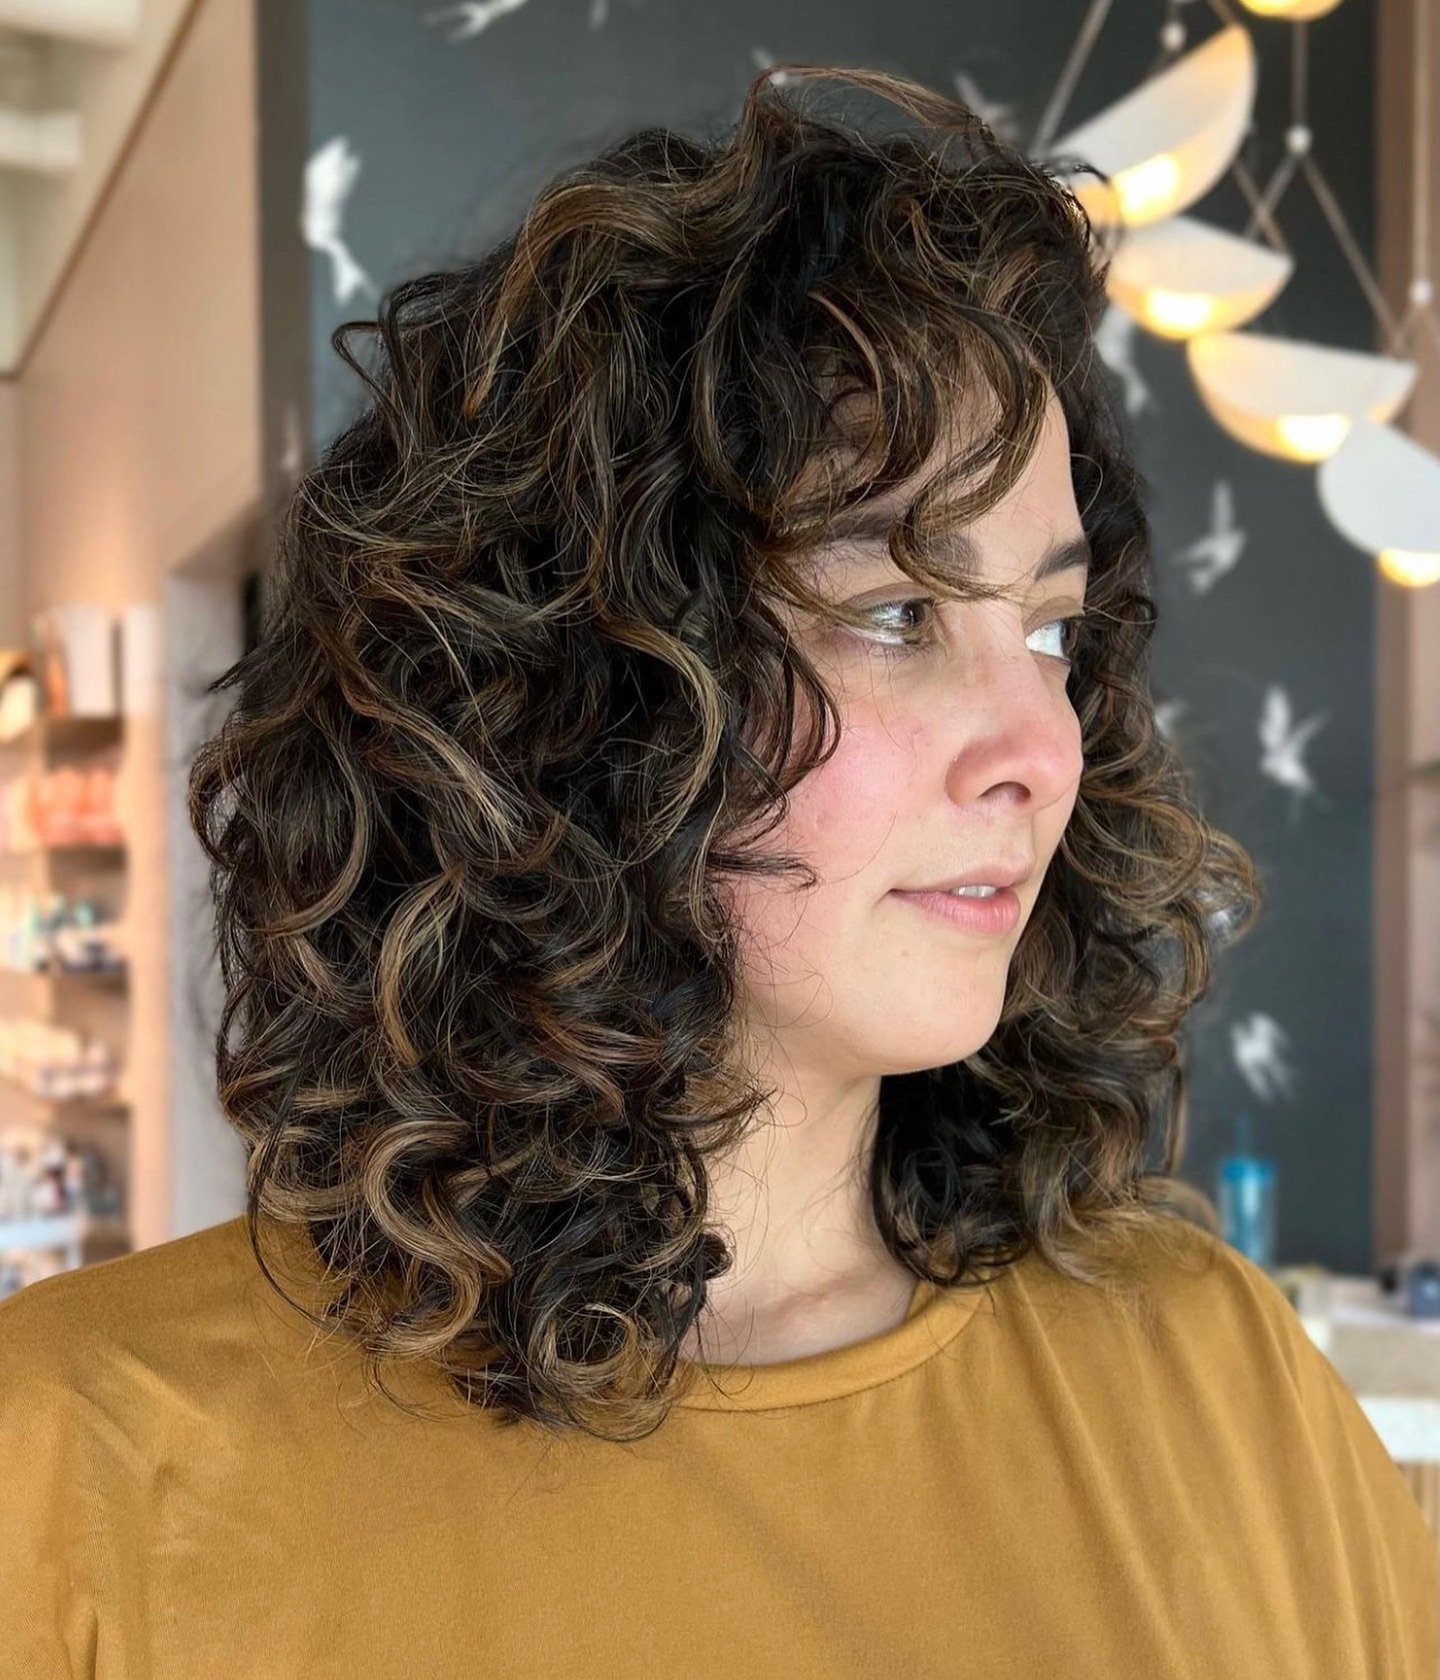 Espresso ☕️✨ Dark base with creamy brown ribbons 
(Also, can we talk about how gorg balayage looks on curly hair? 😍) 

👉🏽 Enhance your curls with Tvon, schedule at aviarybeauty.com 

#curlybalayage #atlcurls #curlspecialist #atlantasalon